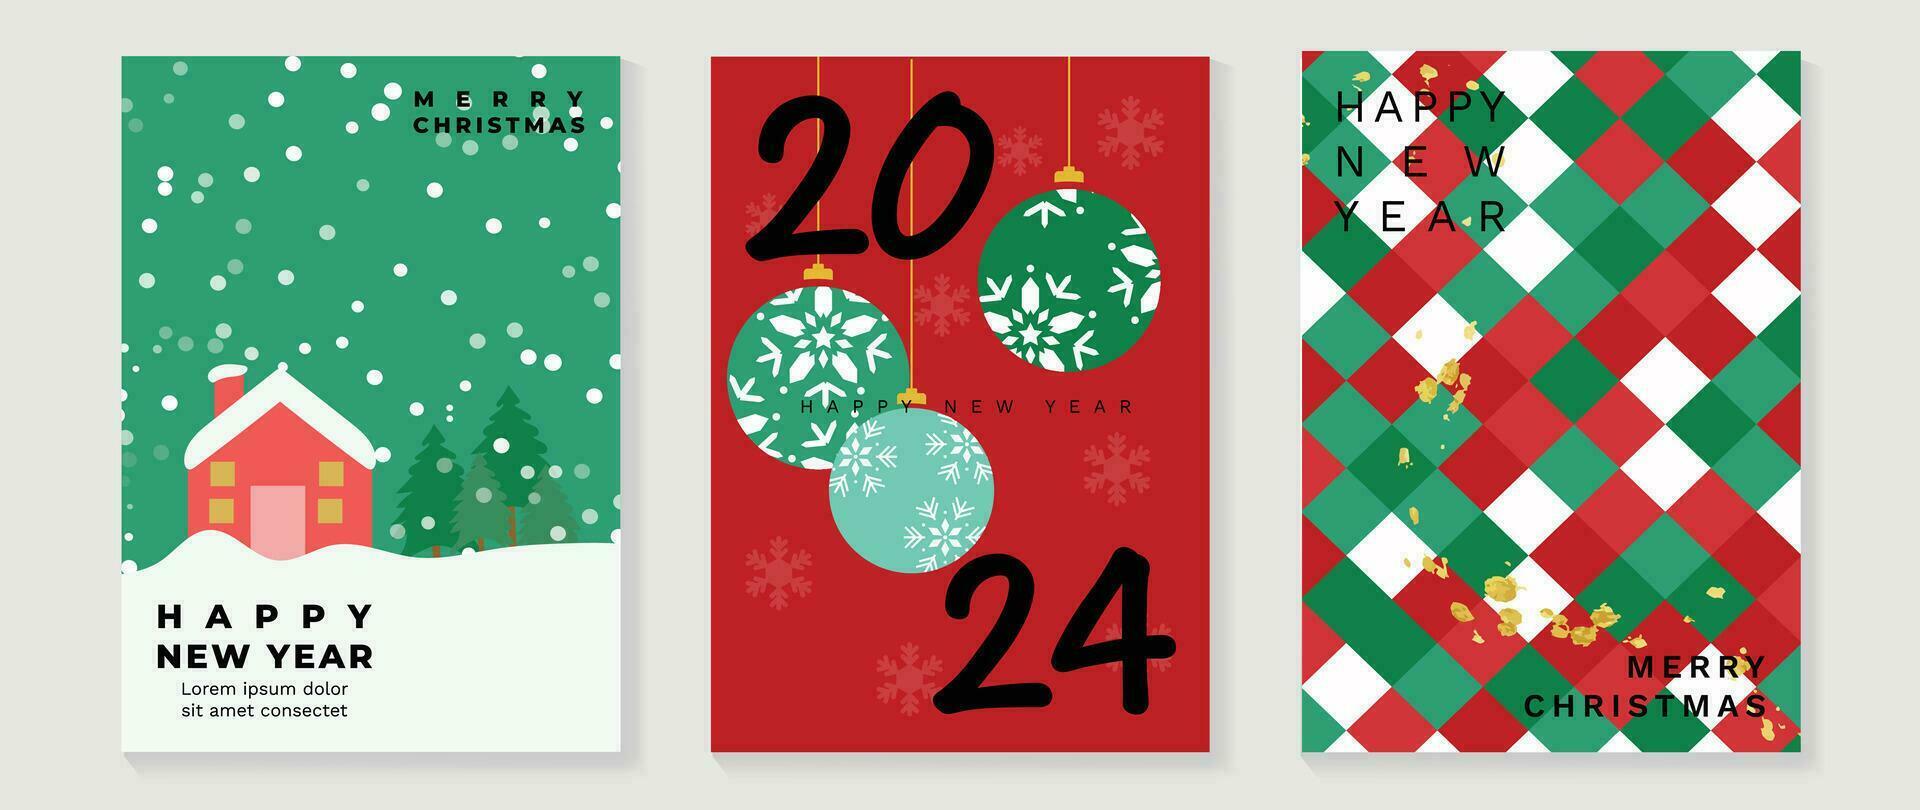 Set of happy new year 2024 and merry christmas concept background. Elements of decorative bauble, christmas tree, home,snowflakes, gold texture. Art design for card, poster, cover, banner, decoration. vector